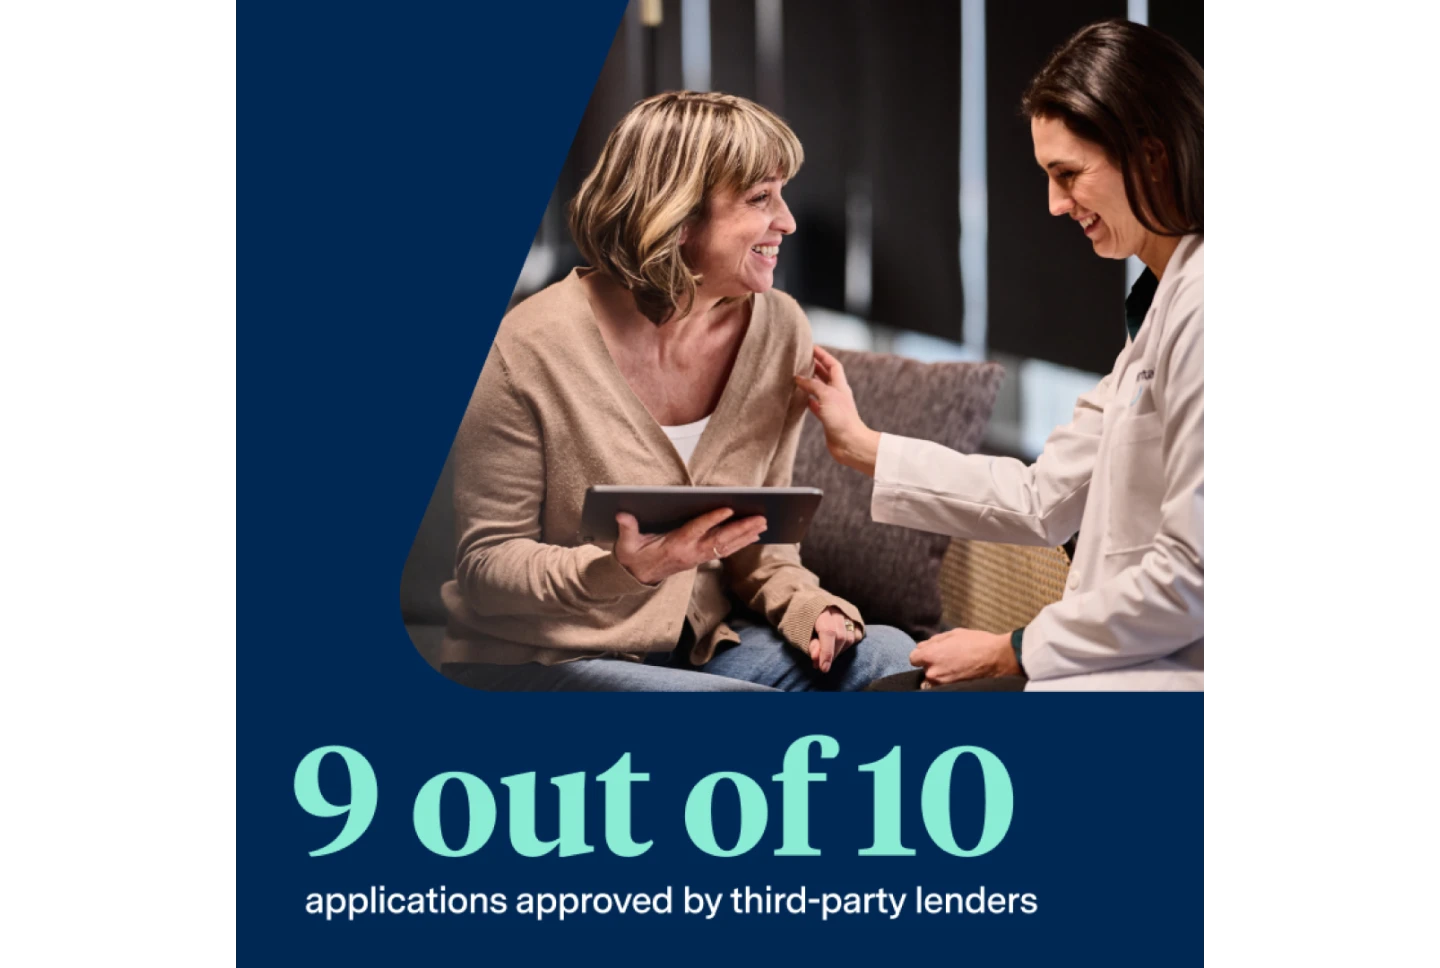 A patient smiling while consulting with an Aspen Dental dentist with the words '9 out of 10 applications approved by third-party lenders.